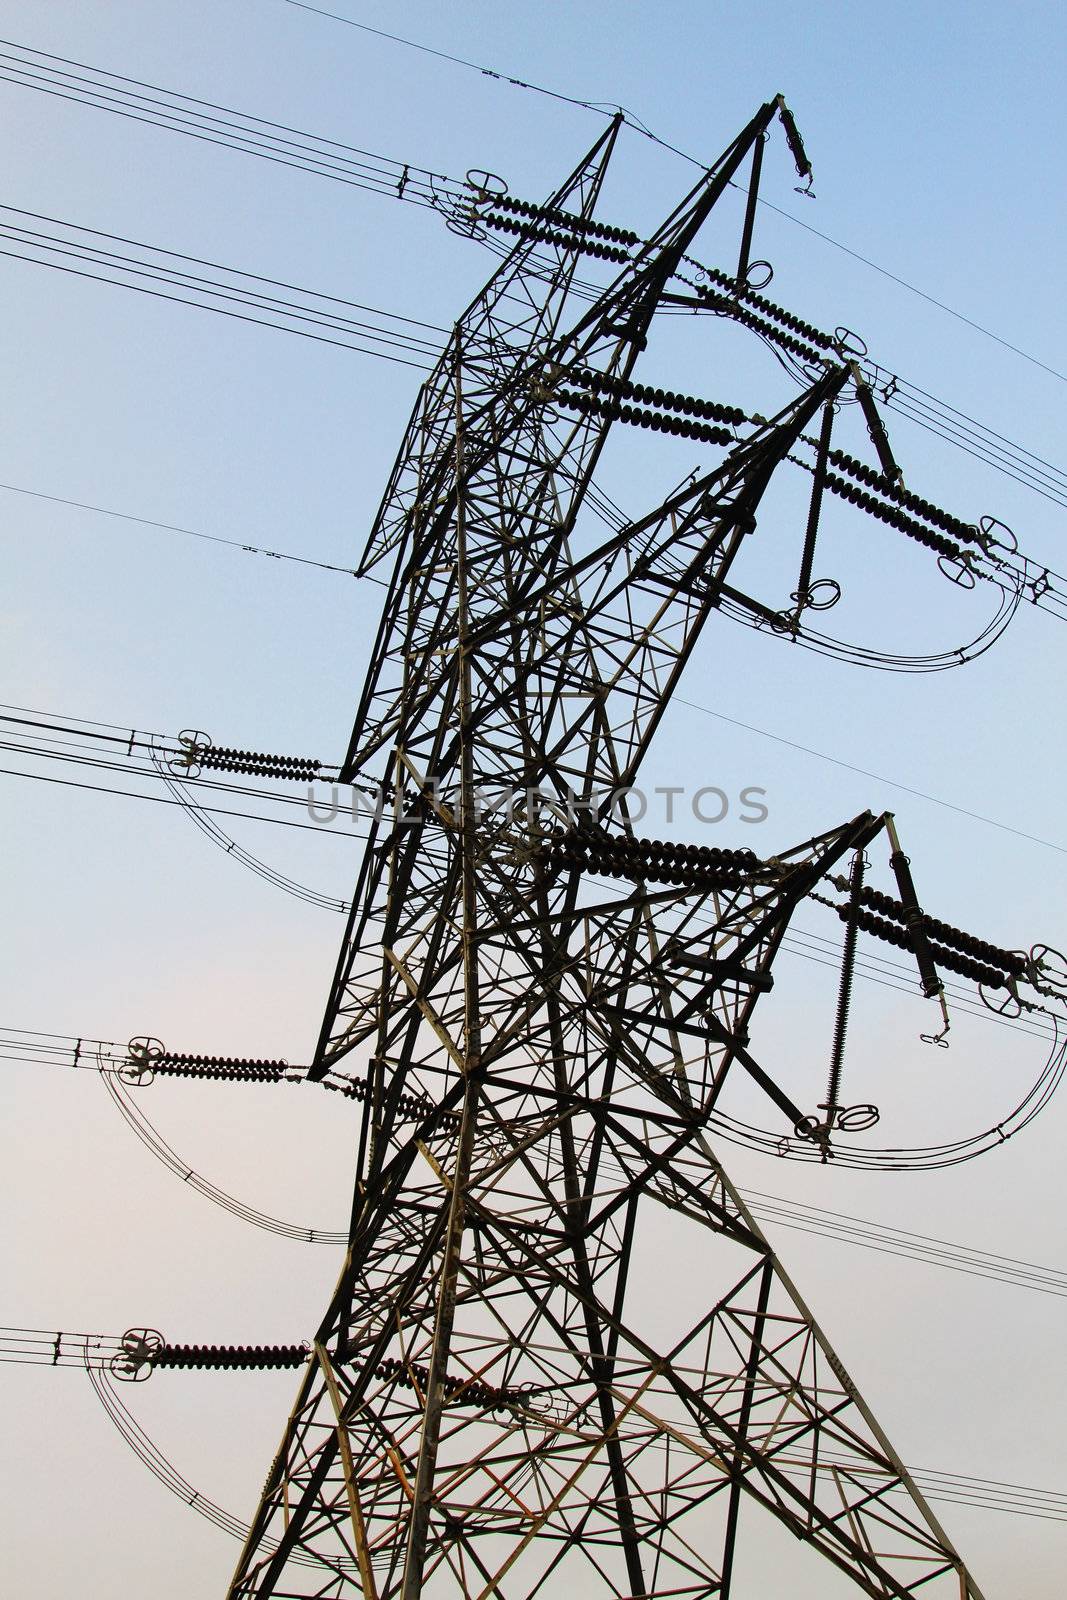 Power transmission tower with cables  by kawing921